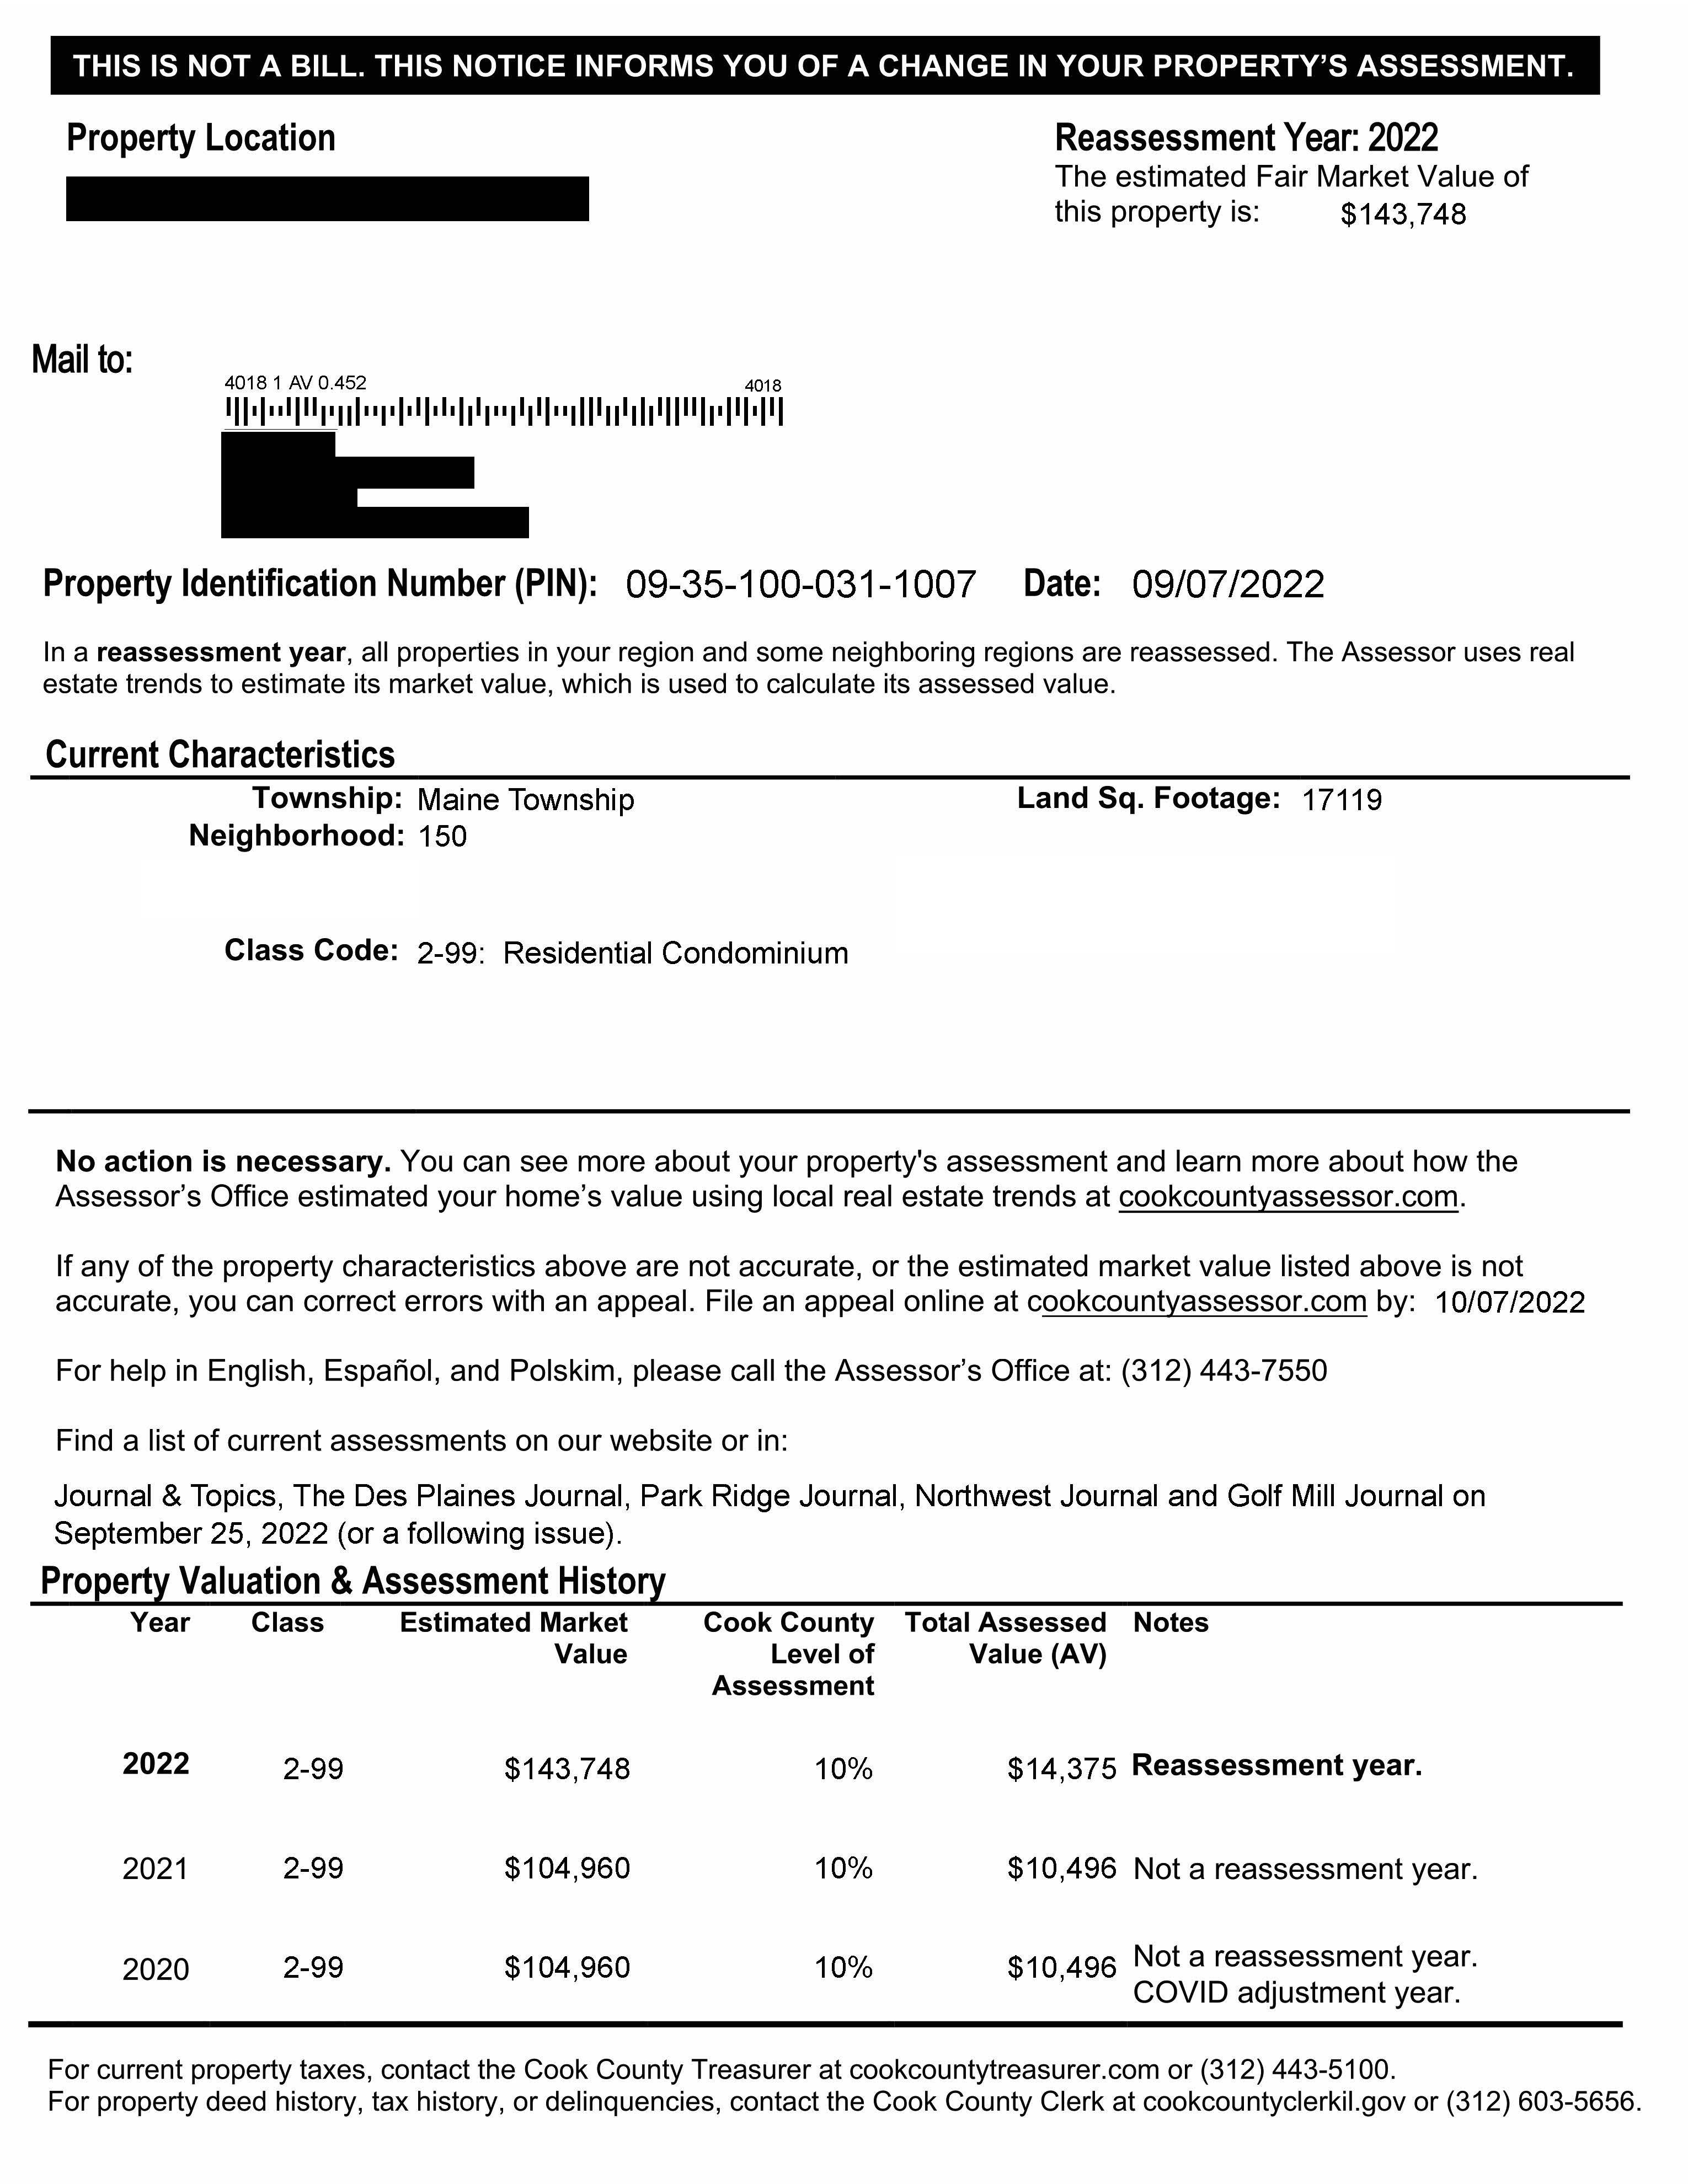 Maine Township Redacted Reassessment Notice Sample